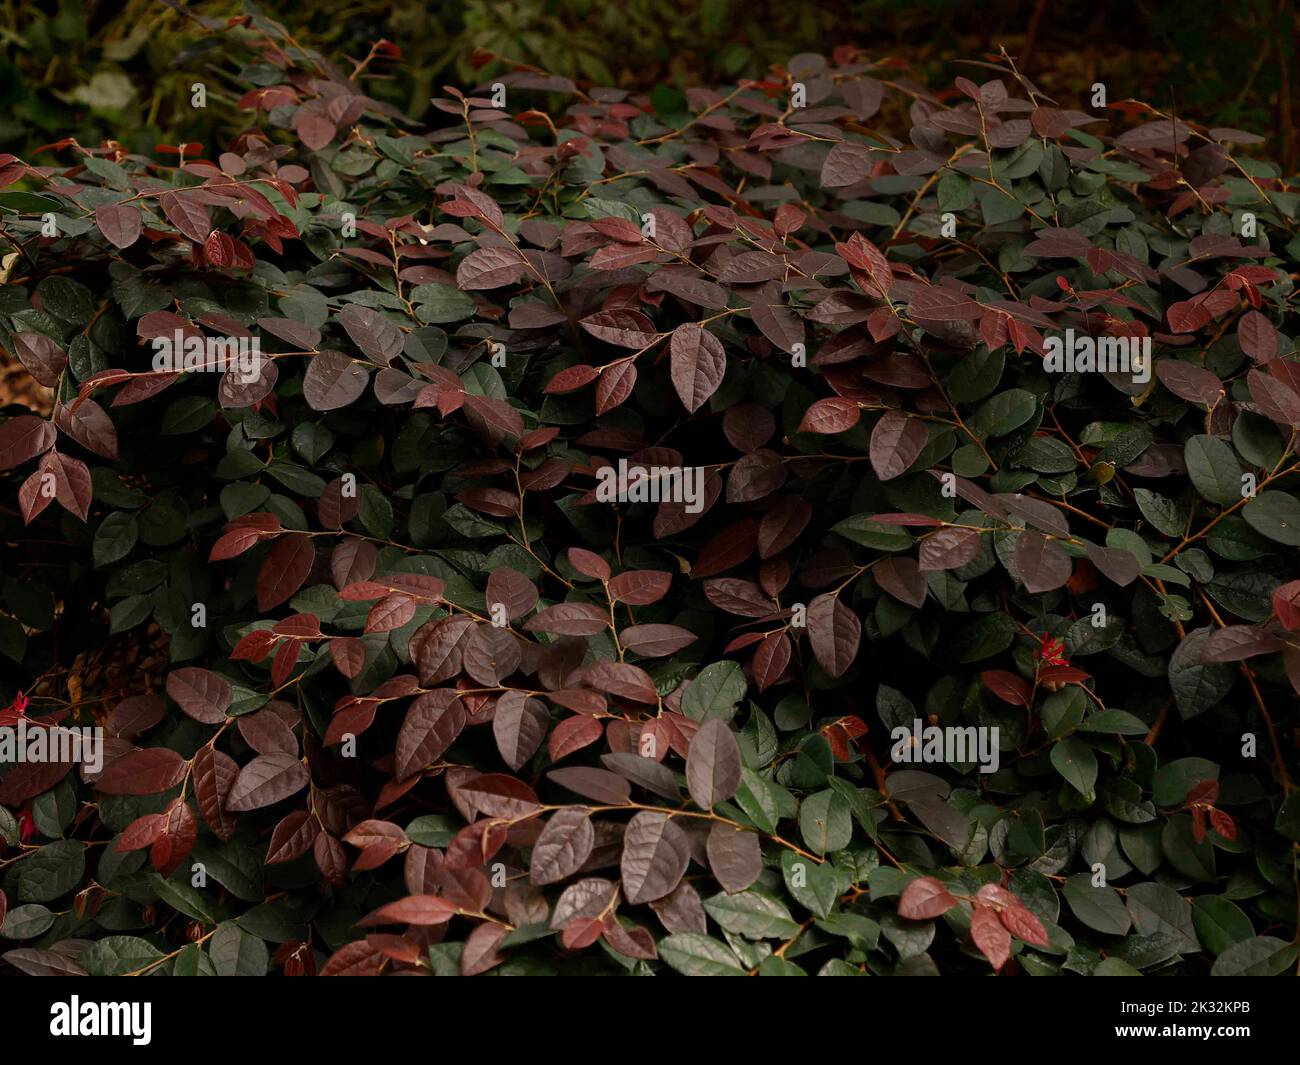 Close up of the semi-evergreen garden shrub Loropetalum chinense rubrum Blush with reddish-purple young leaves seen in late September. Stock Photo